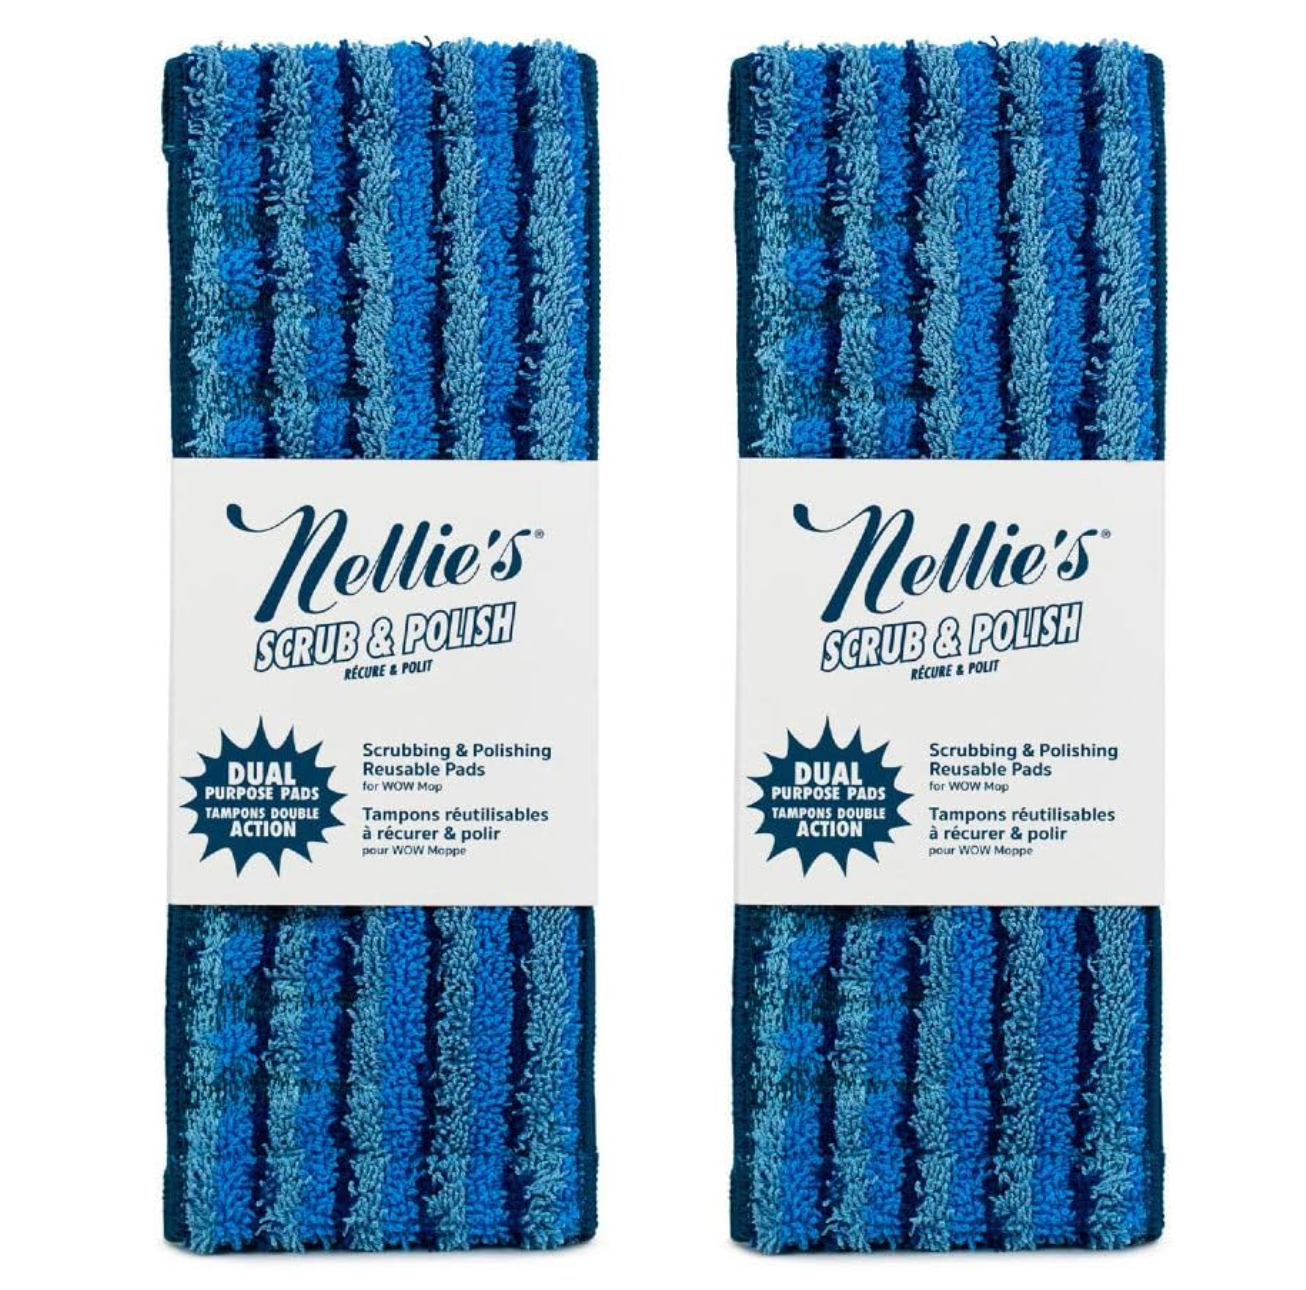 Nellie's Wow Mop Scrub and Polish Refill Pads – Pack of 2